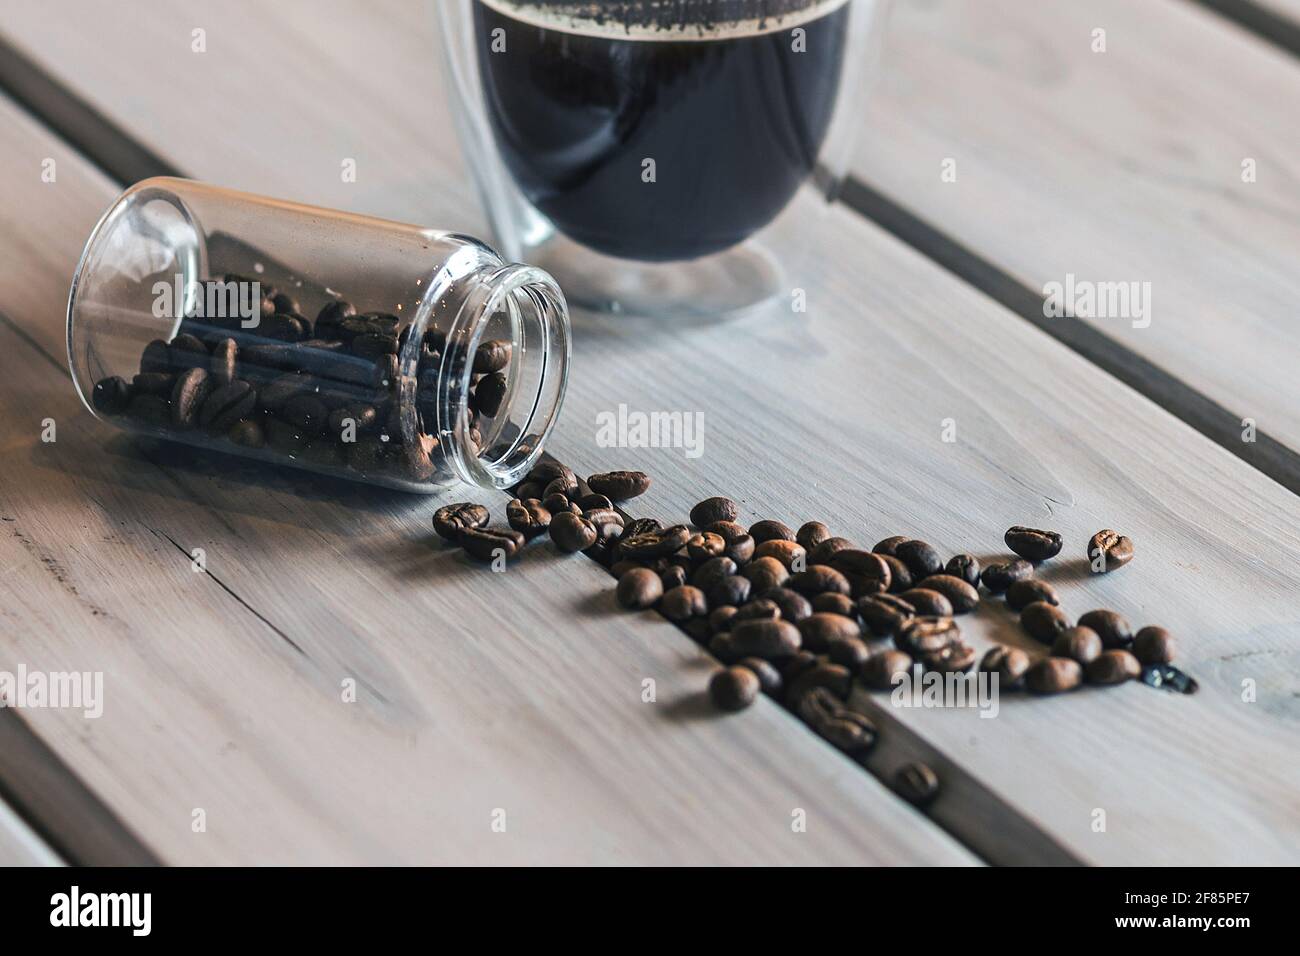 Transparent glass cup of hot coffee and coffee beans on wooden table. Stock Photo